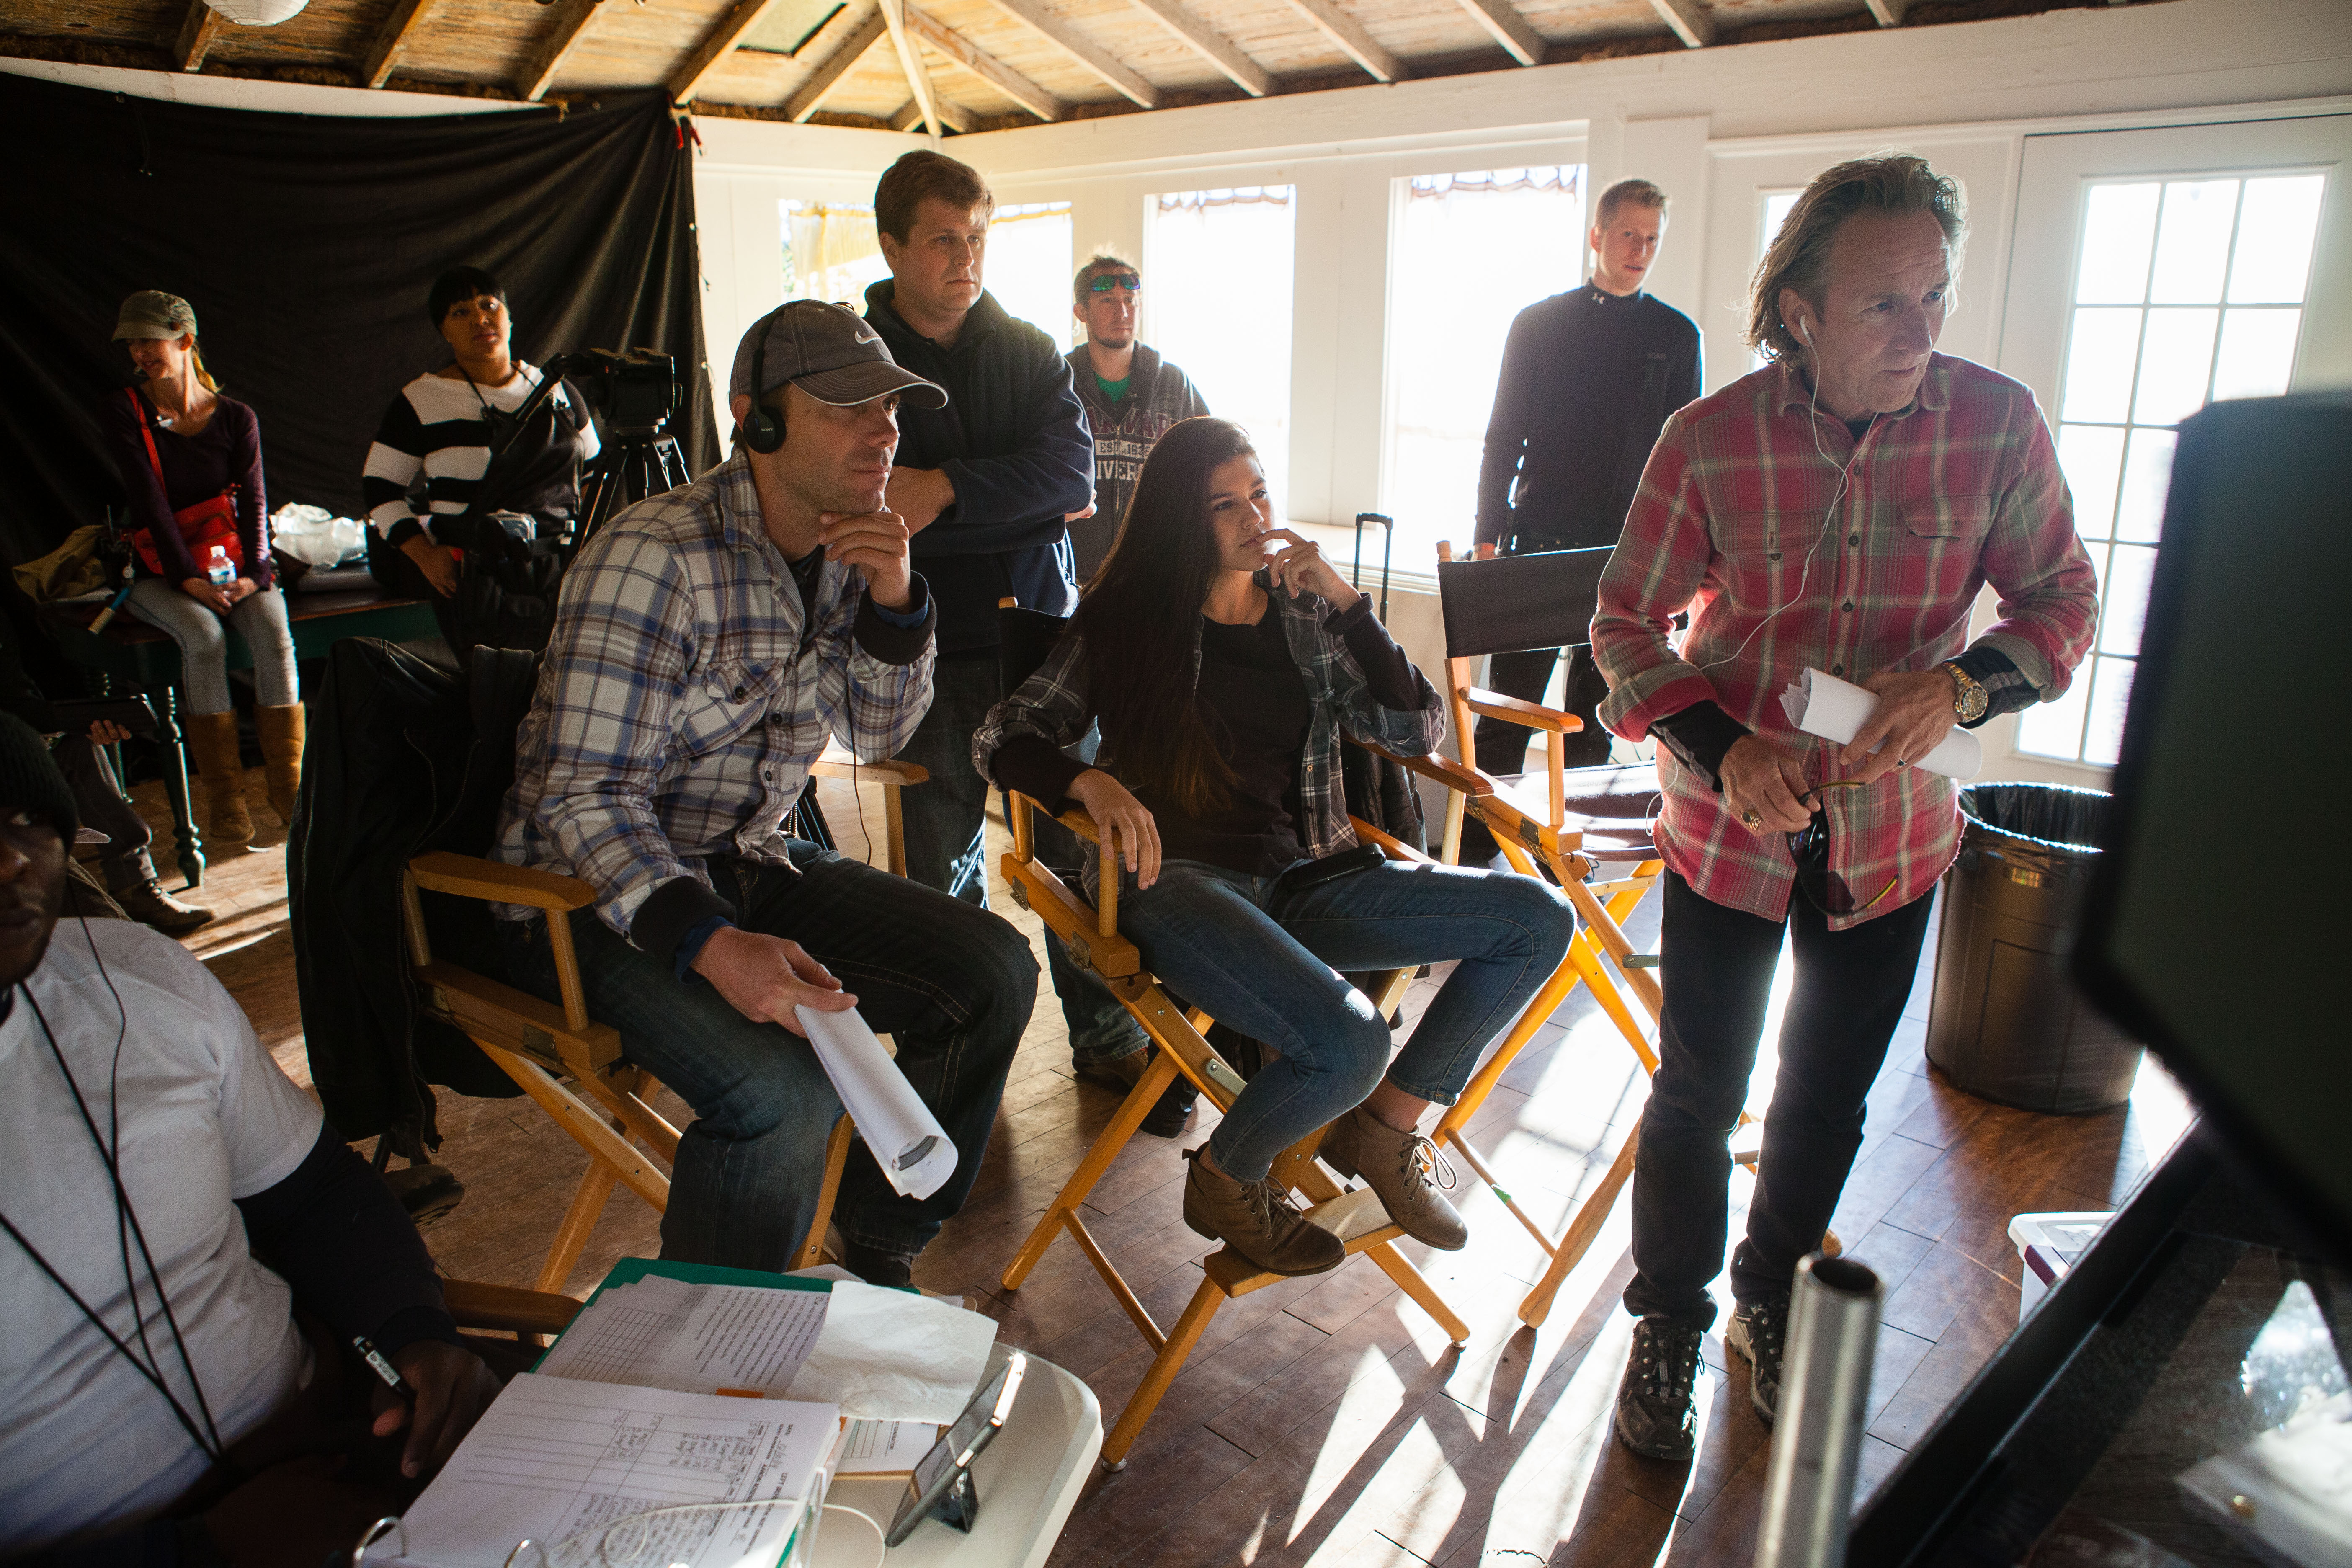 Randy LaHaye, Pete Wages, Amber Montana, Larry A. McLean On the set of VANISHED